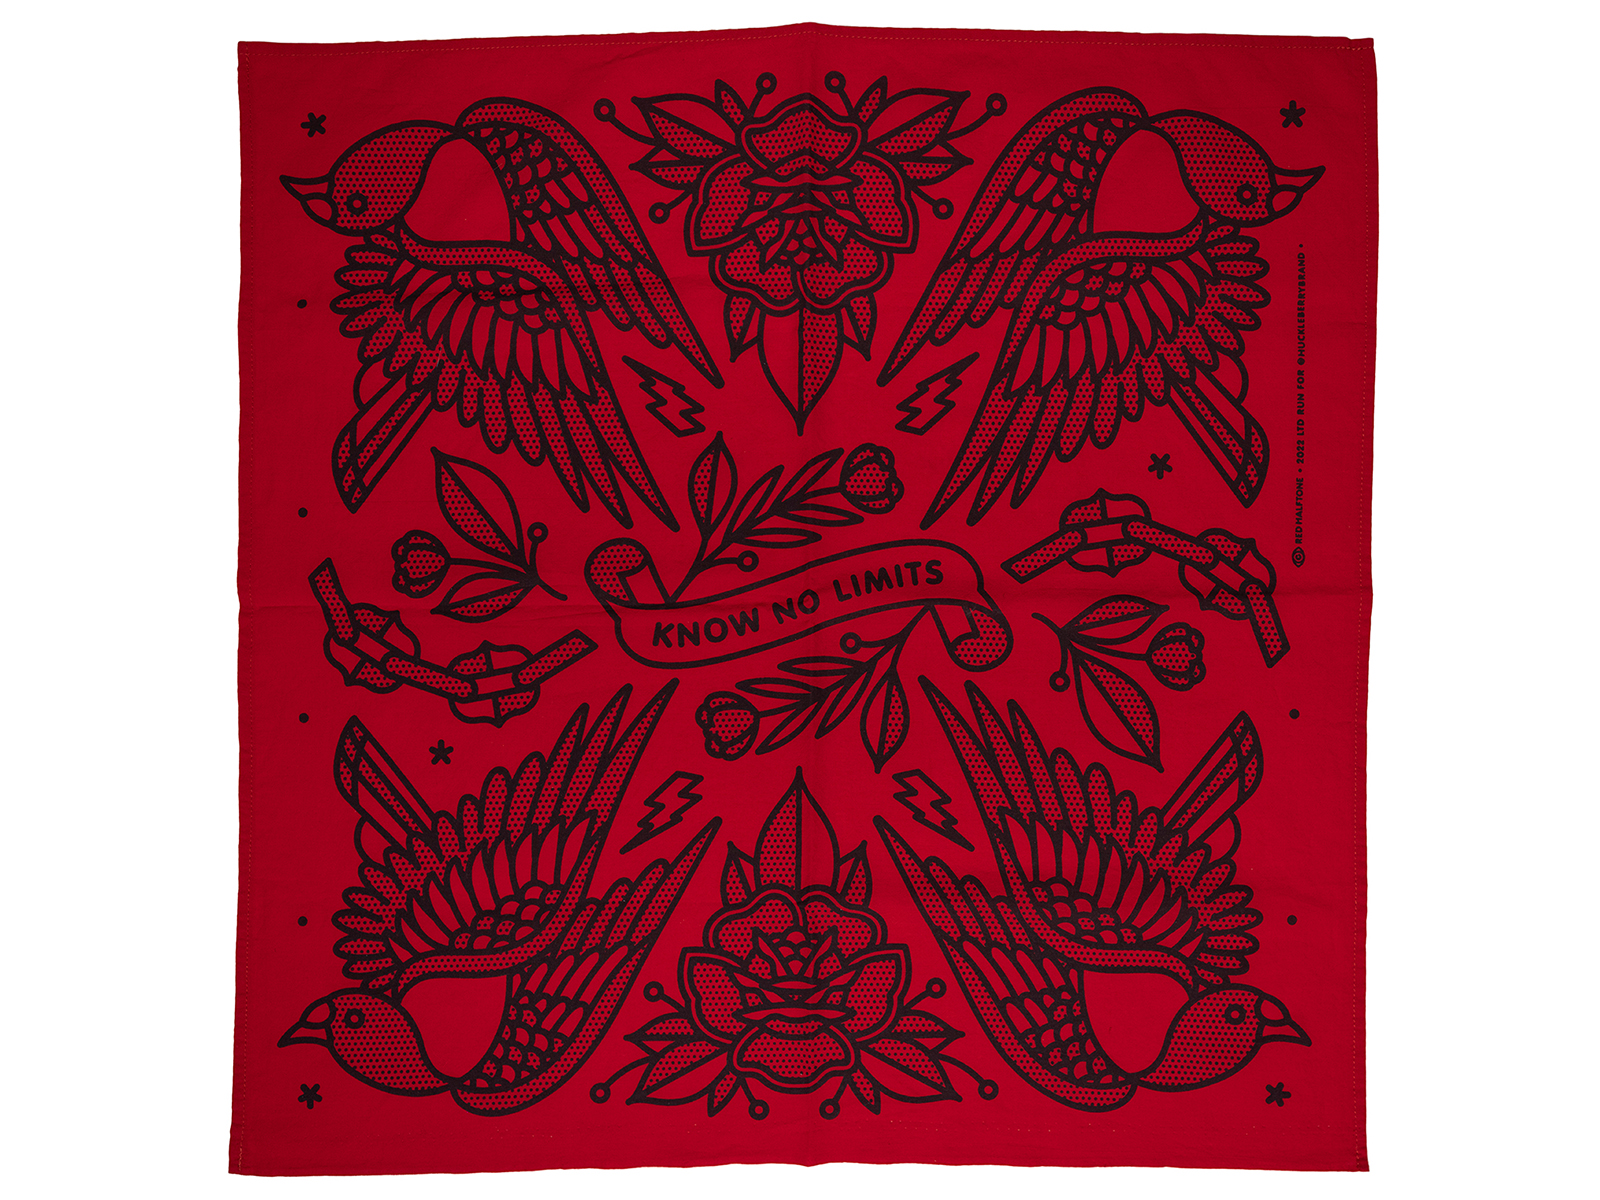 Flattened bandana showing the black on red colorway